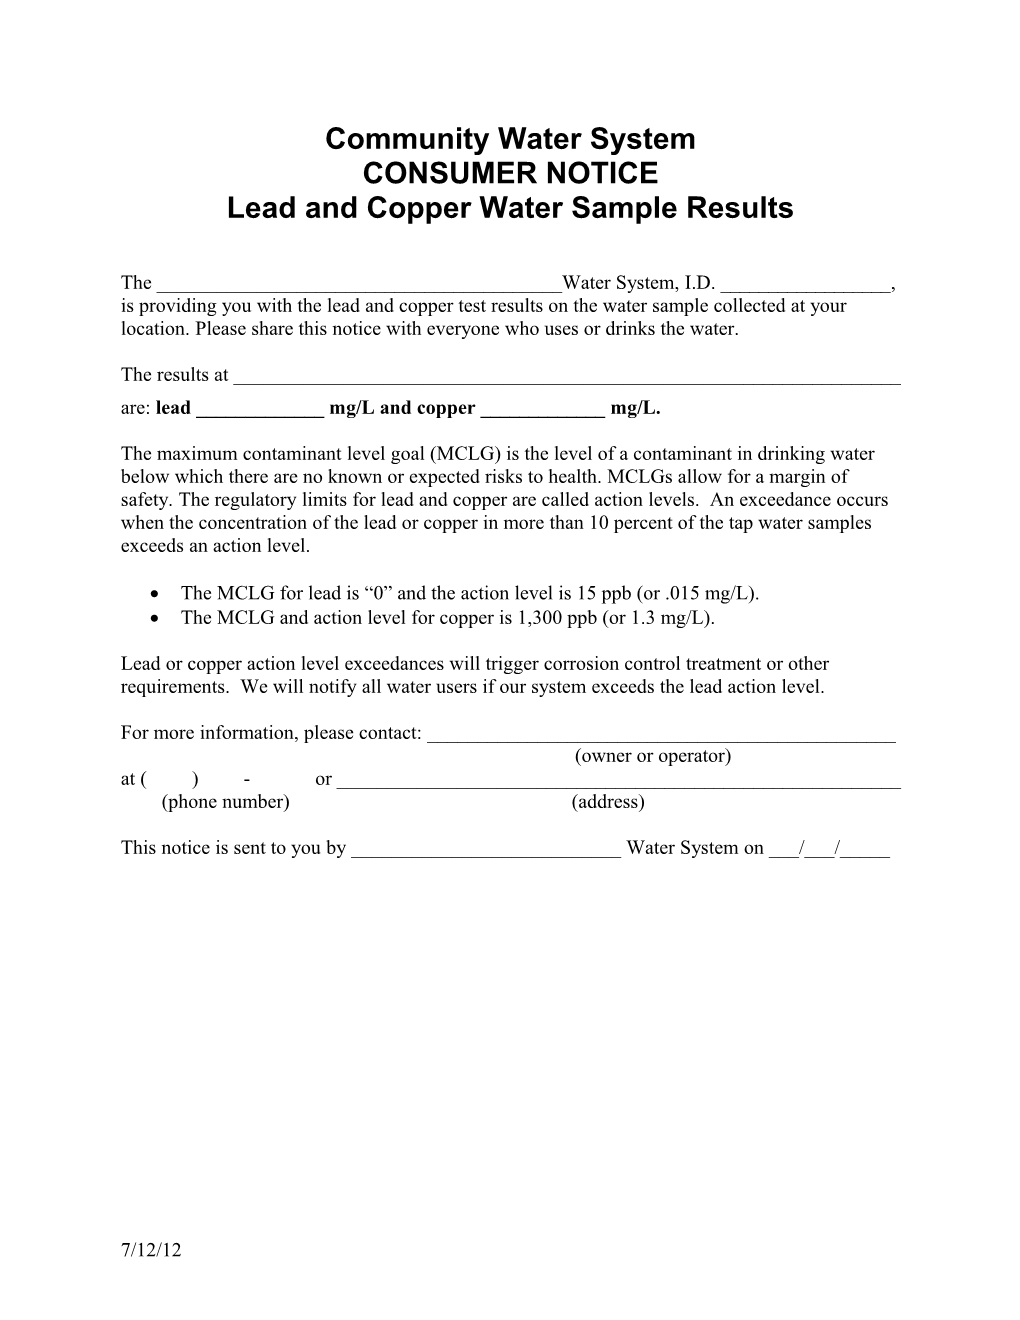 Consumer Notice - Lead and Copper Water Sample Results Form